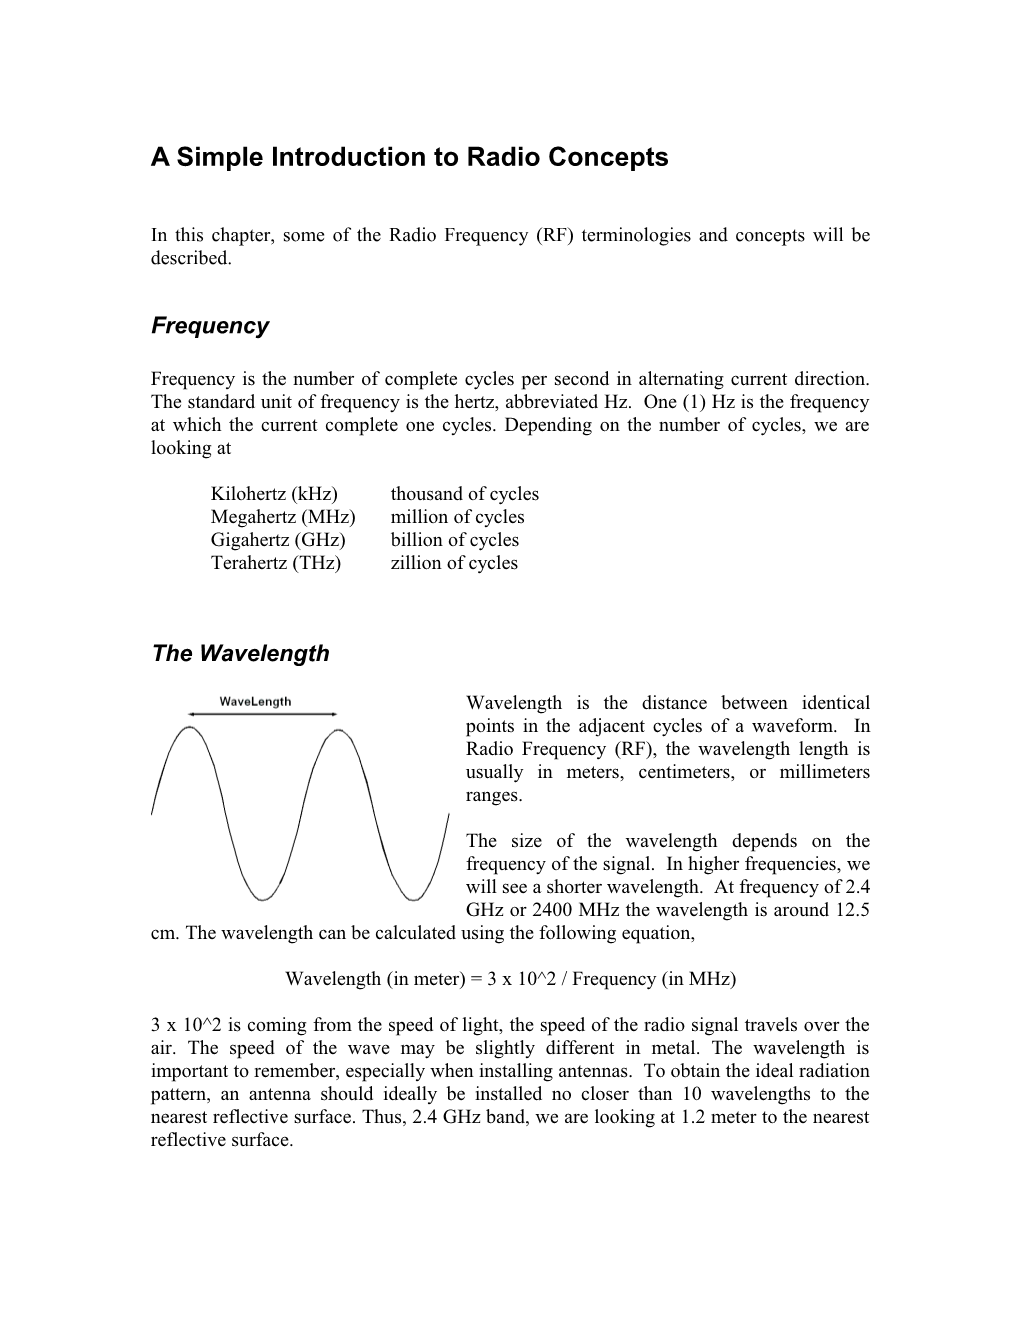 A Simple Introduction to Radio Concepts